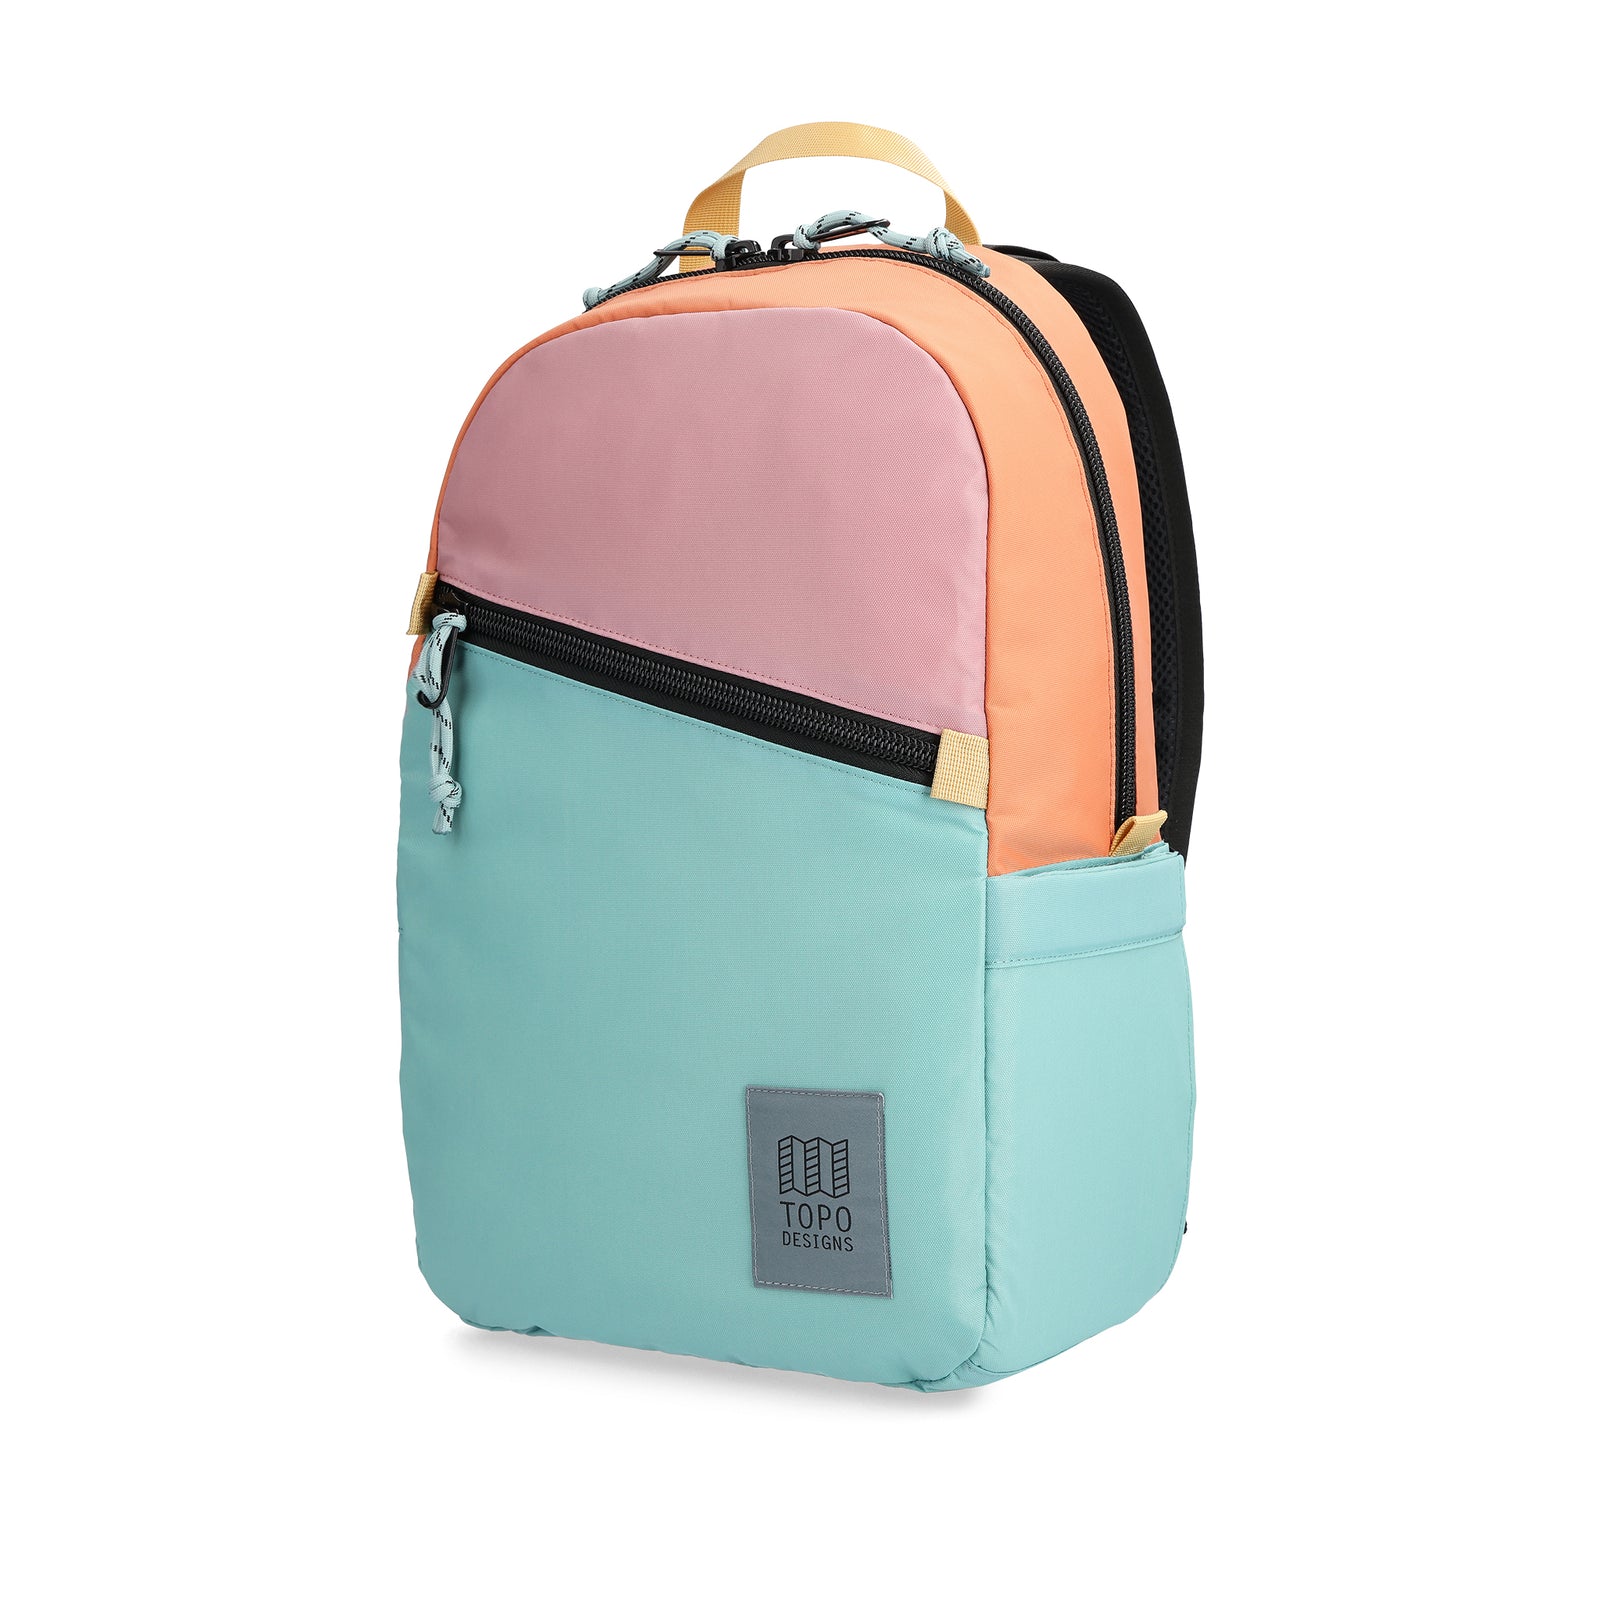 Front View of Topo Designs Light Pack in "Rose / Geode Green"